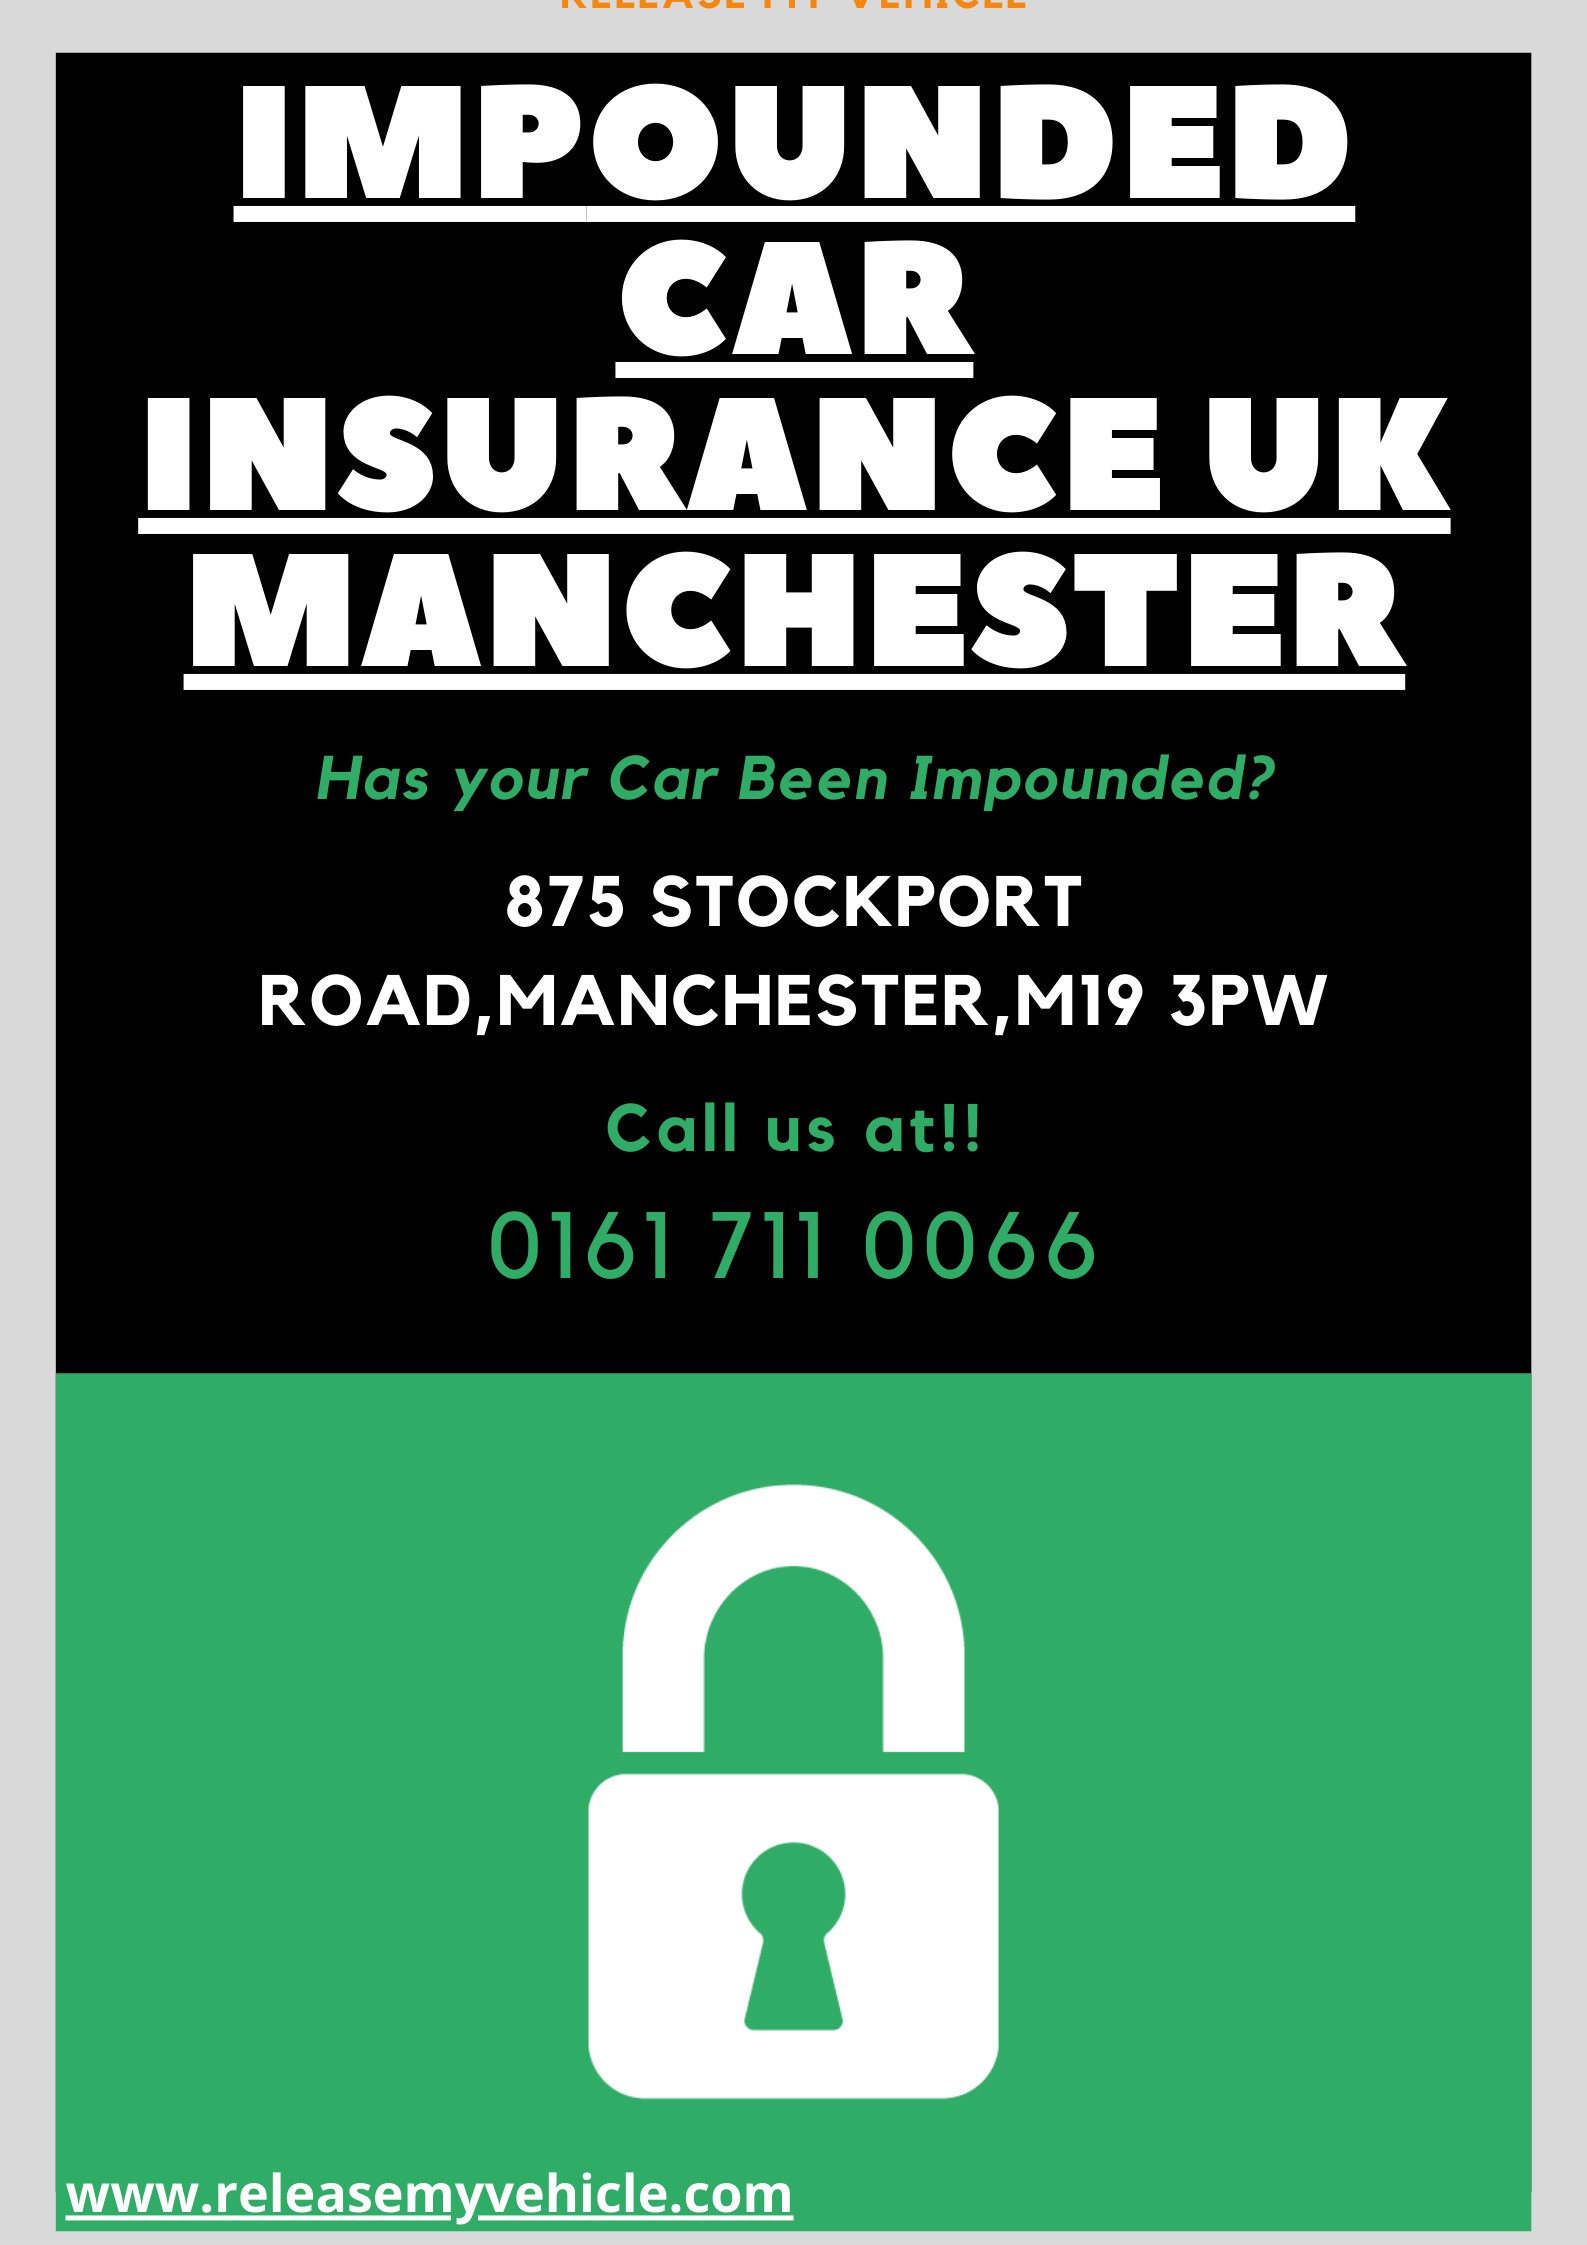 Impounded Car Insurance UK Manchester| Release My Vehicle